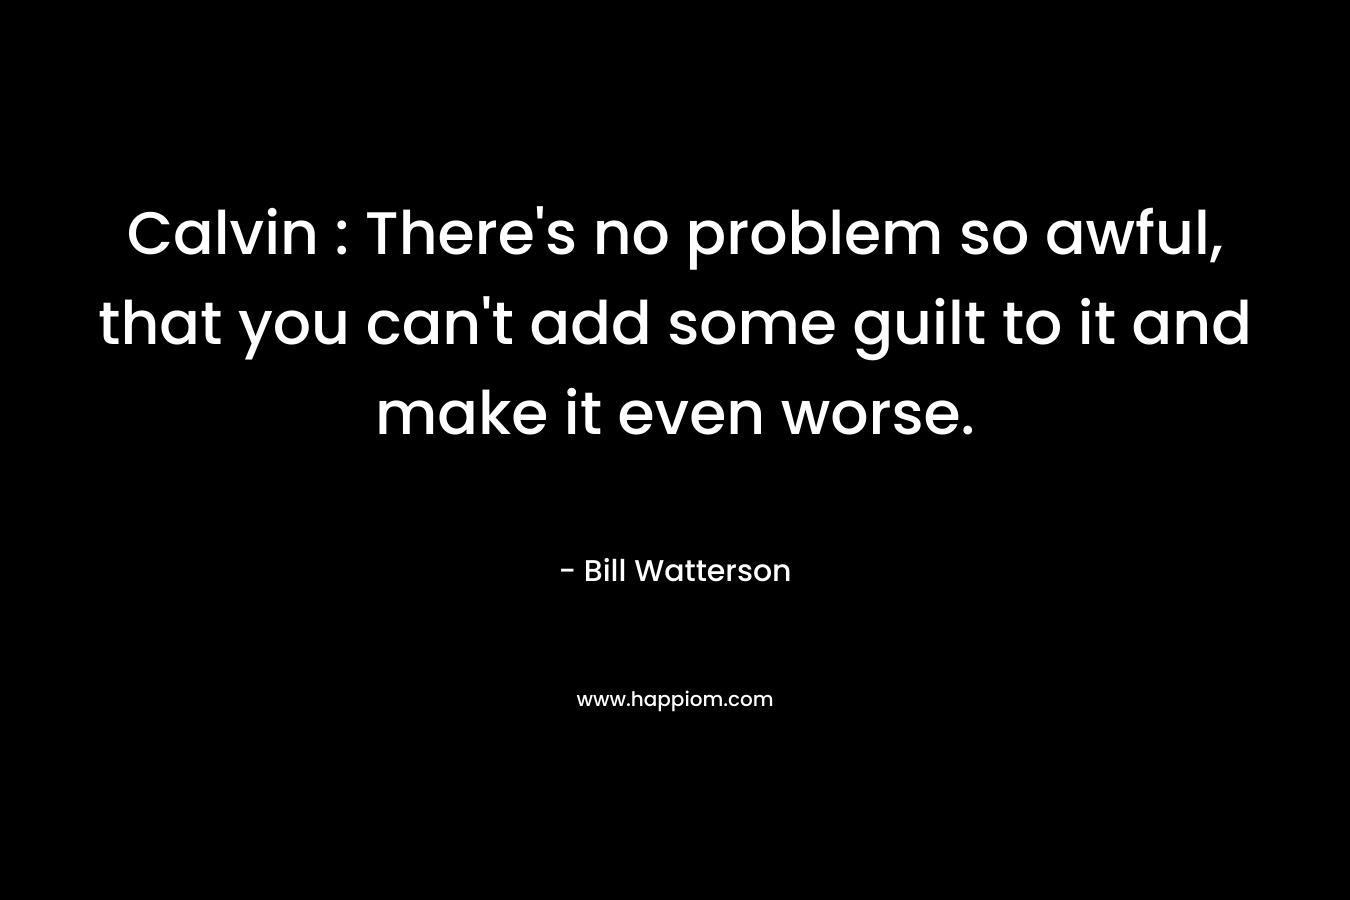 Calvin : There’s no problem so awful, that you can’t add some guilt to it and make it even worse. – Bill Watterson